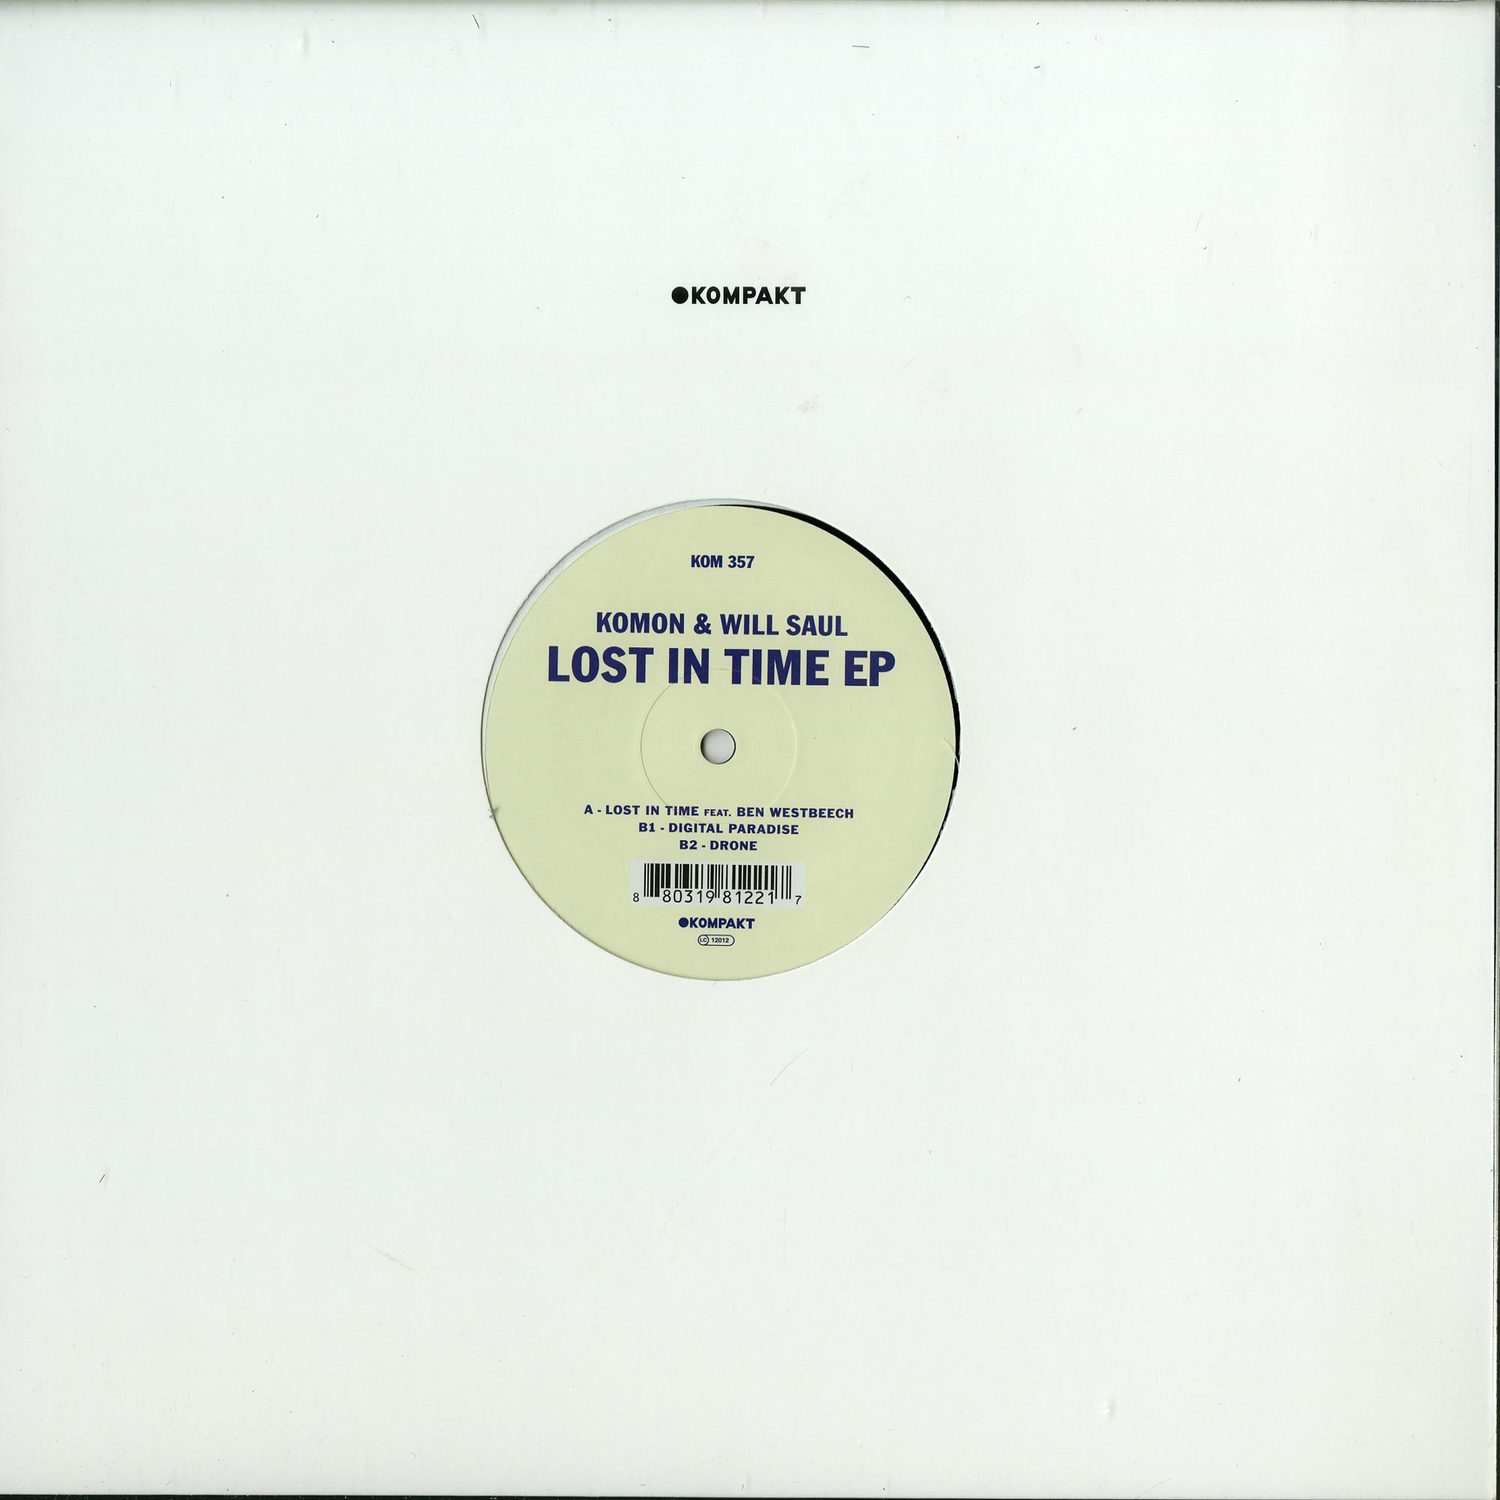 Komon & Will Saul - LOST IN TIME EP